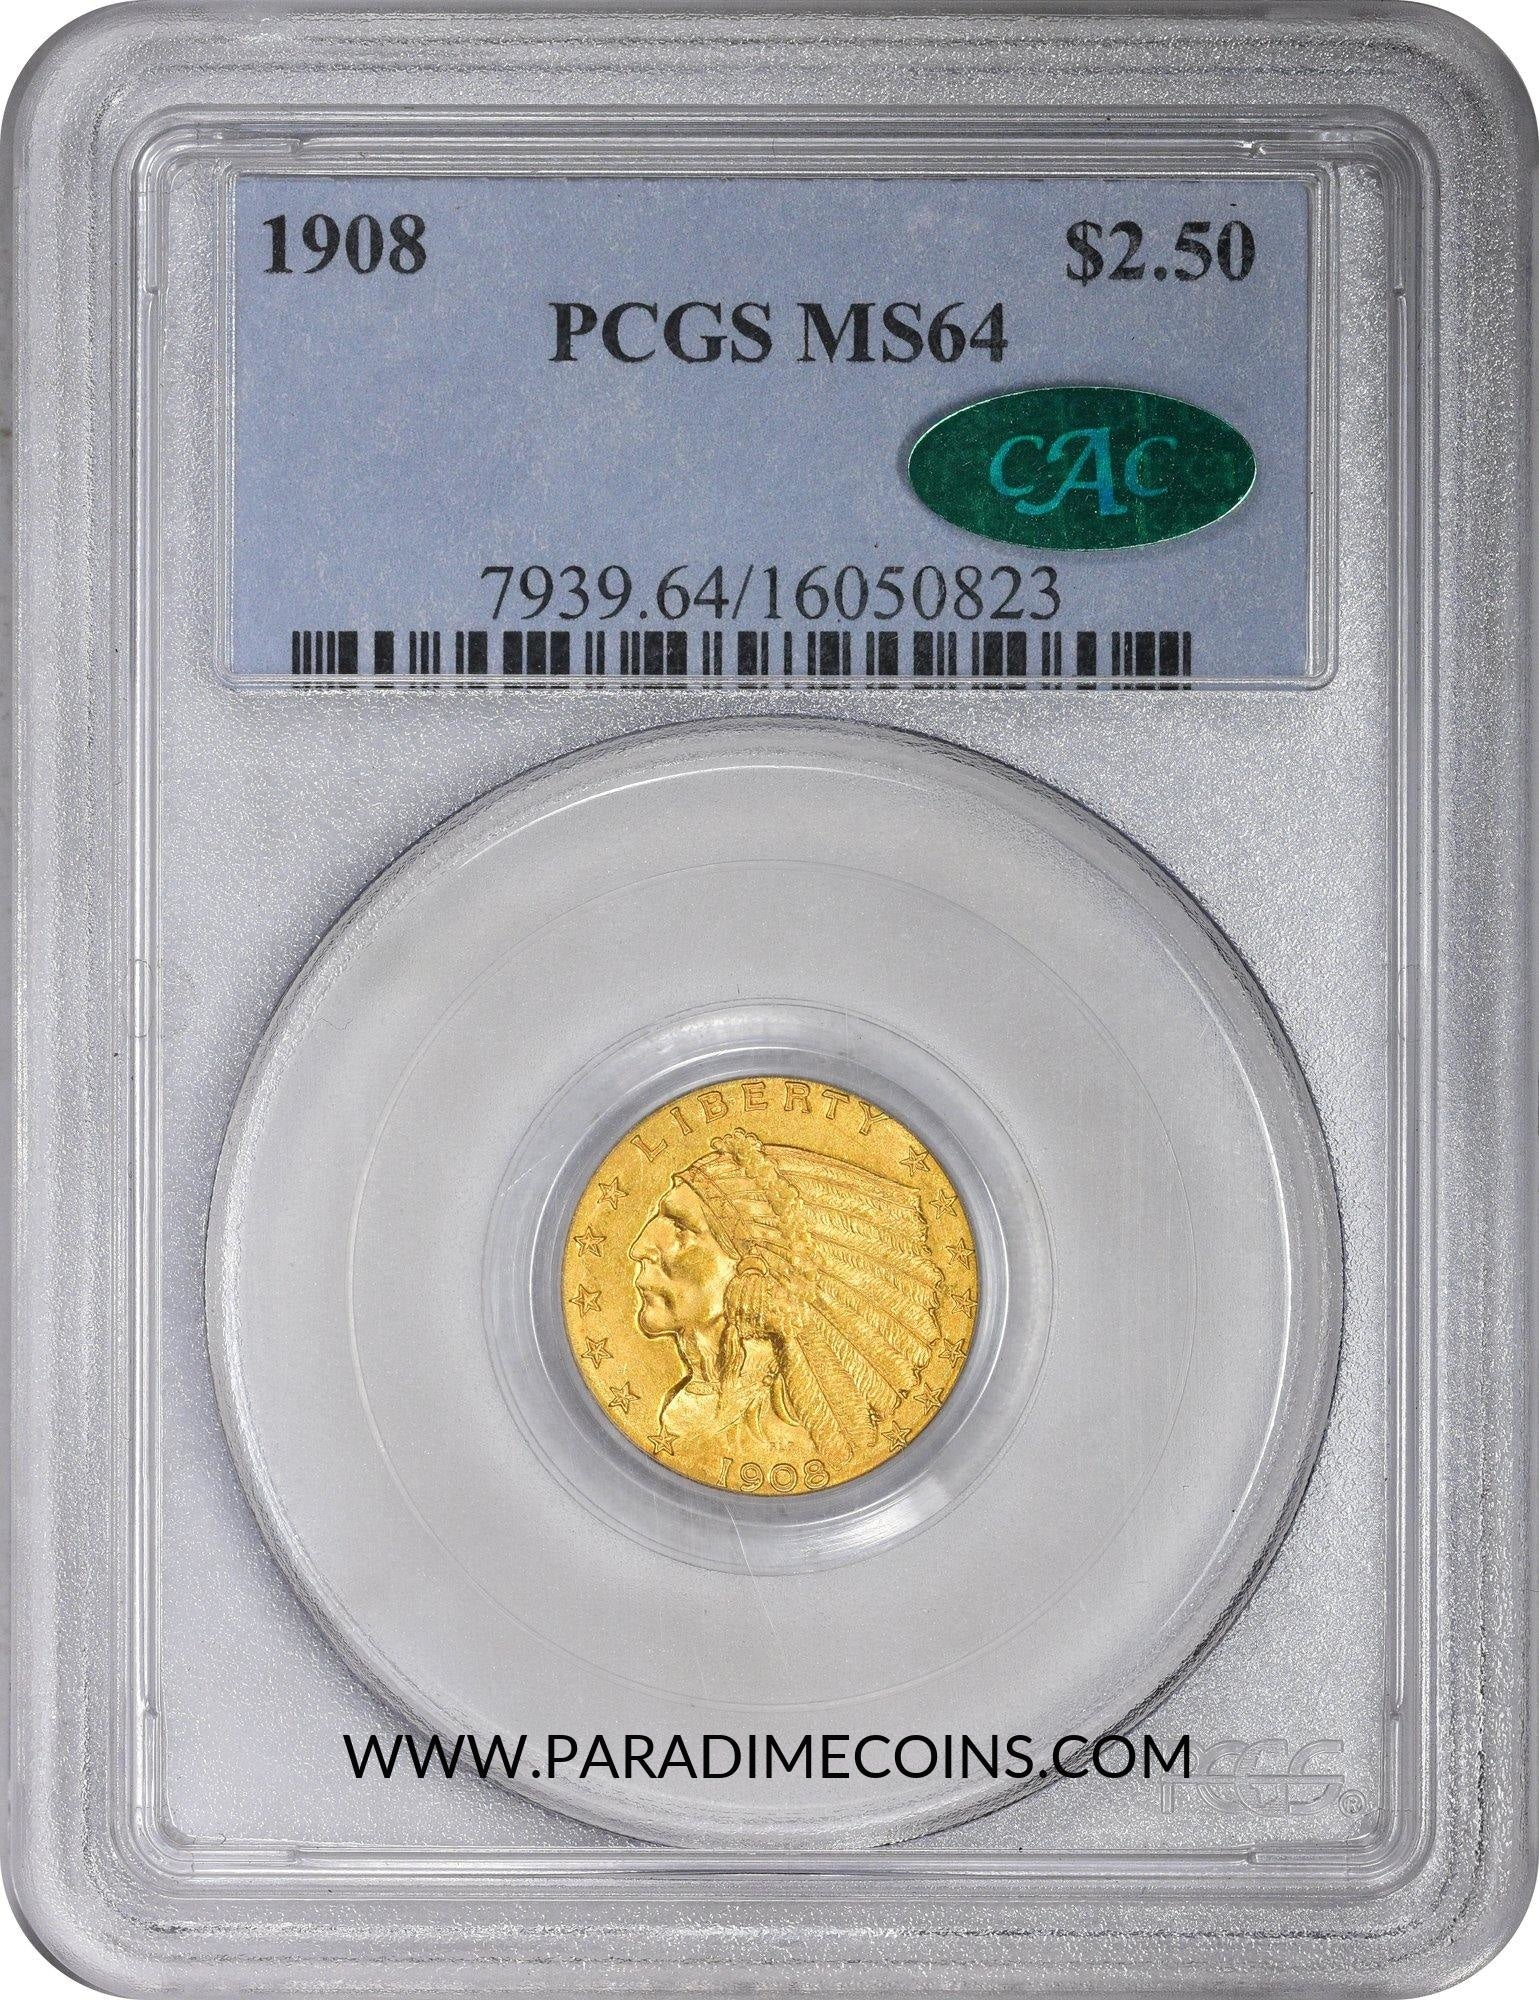 1908 $2.5 MS64 PCGS CAC - Paradime Coins | PCGS NGC CACG CAC Rare US Numismatic Coins For Sale